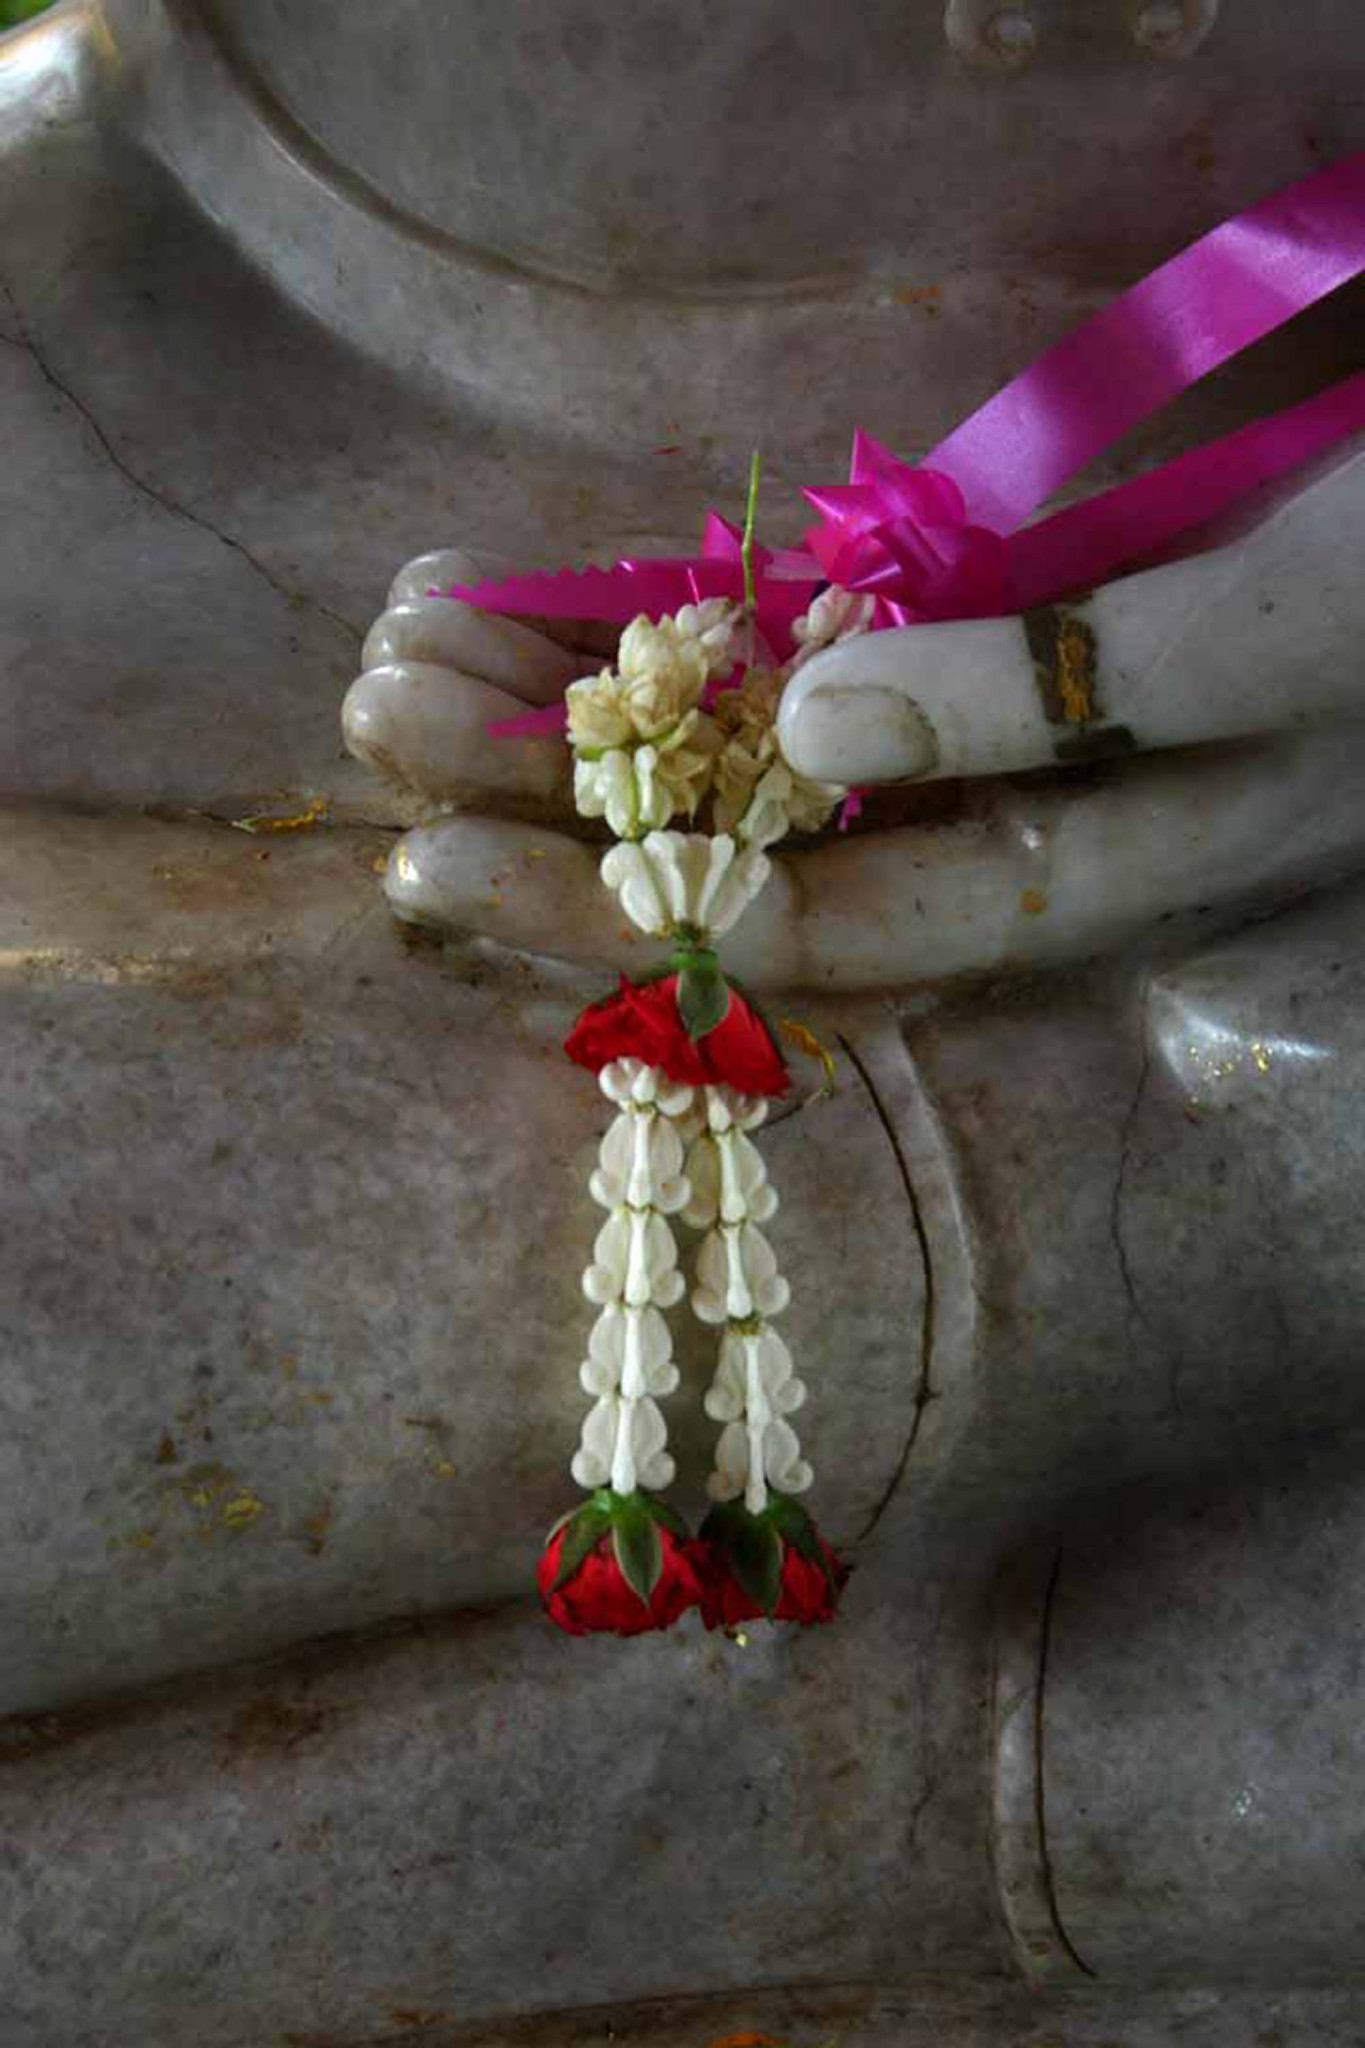 Sacrificial offerings for the Buddha in Thailand